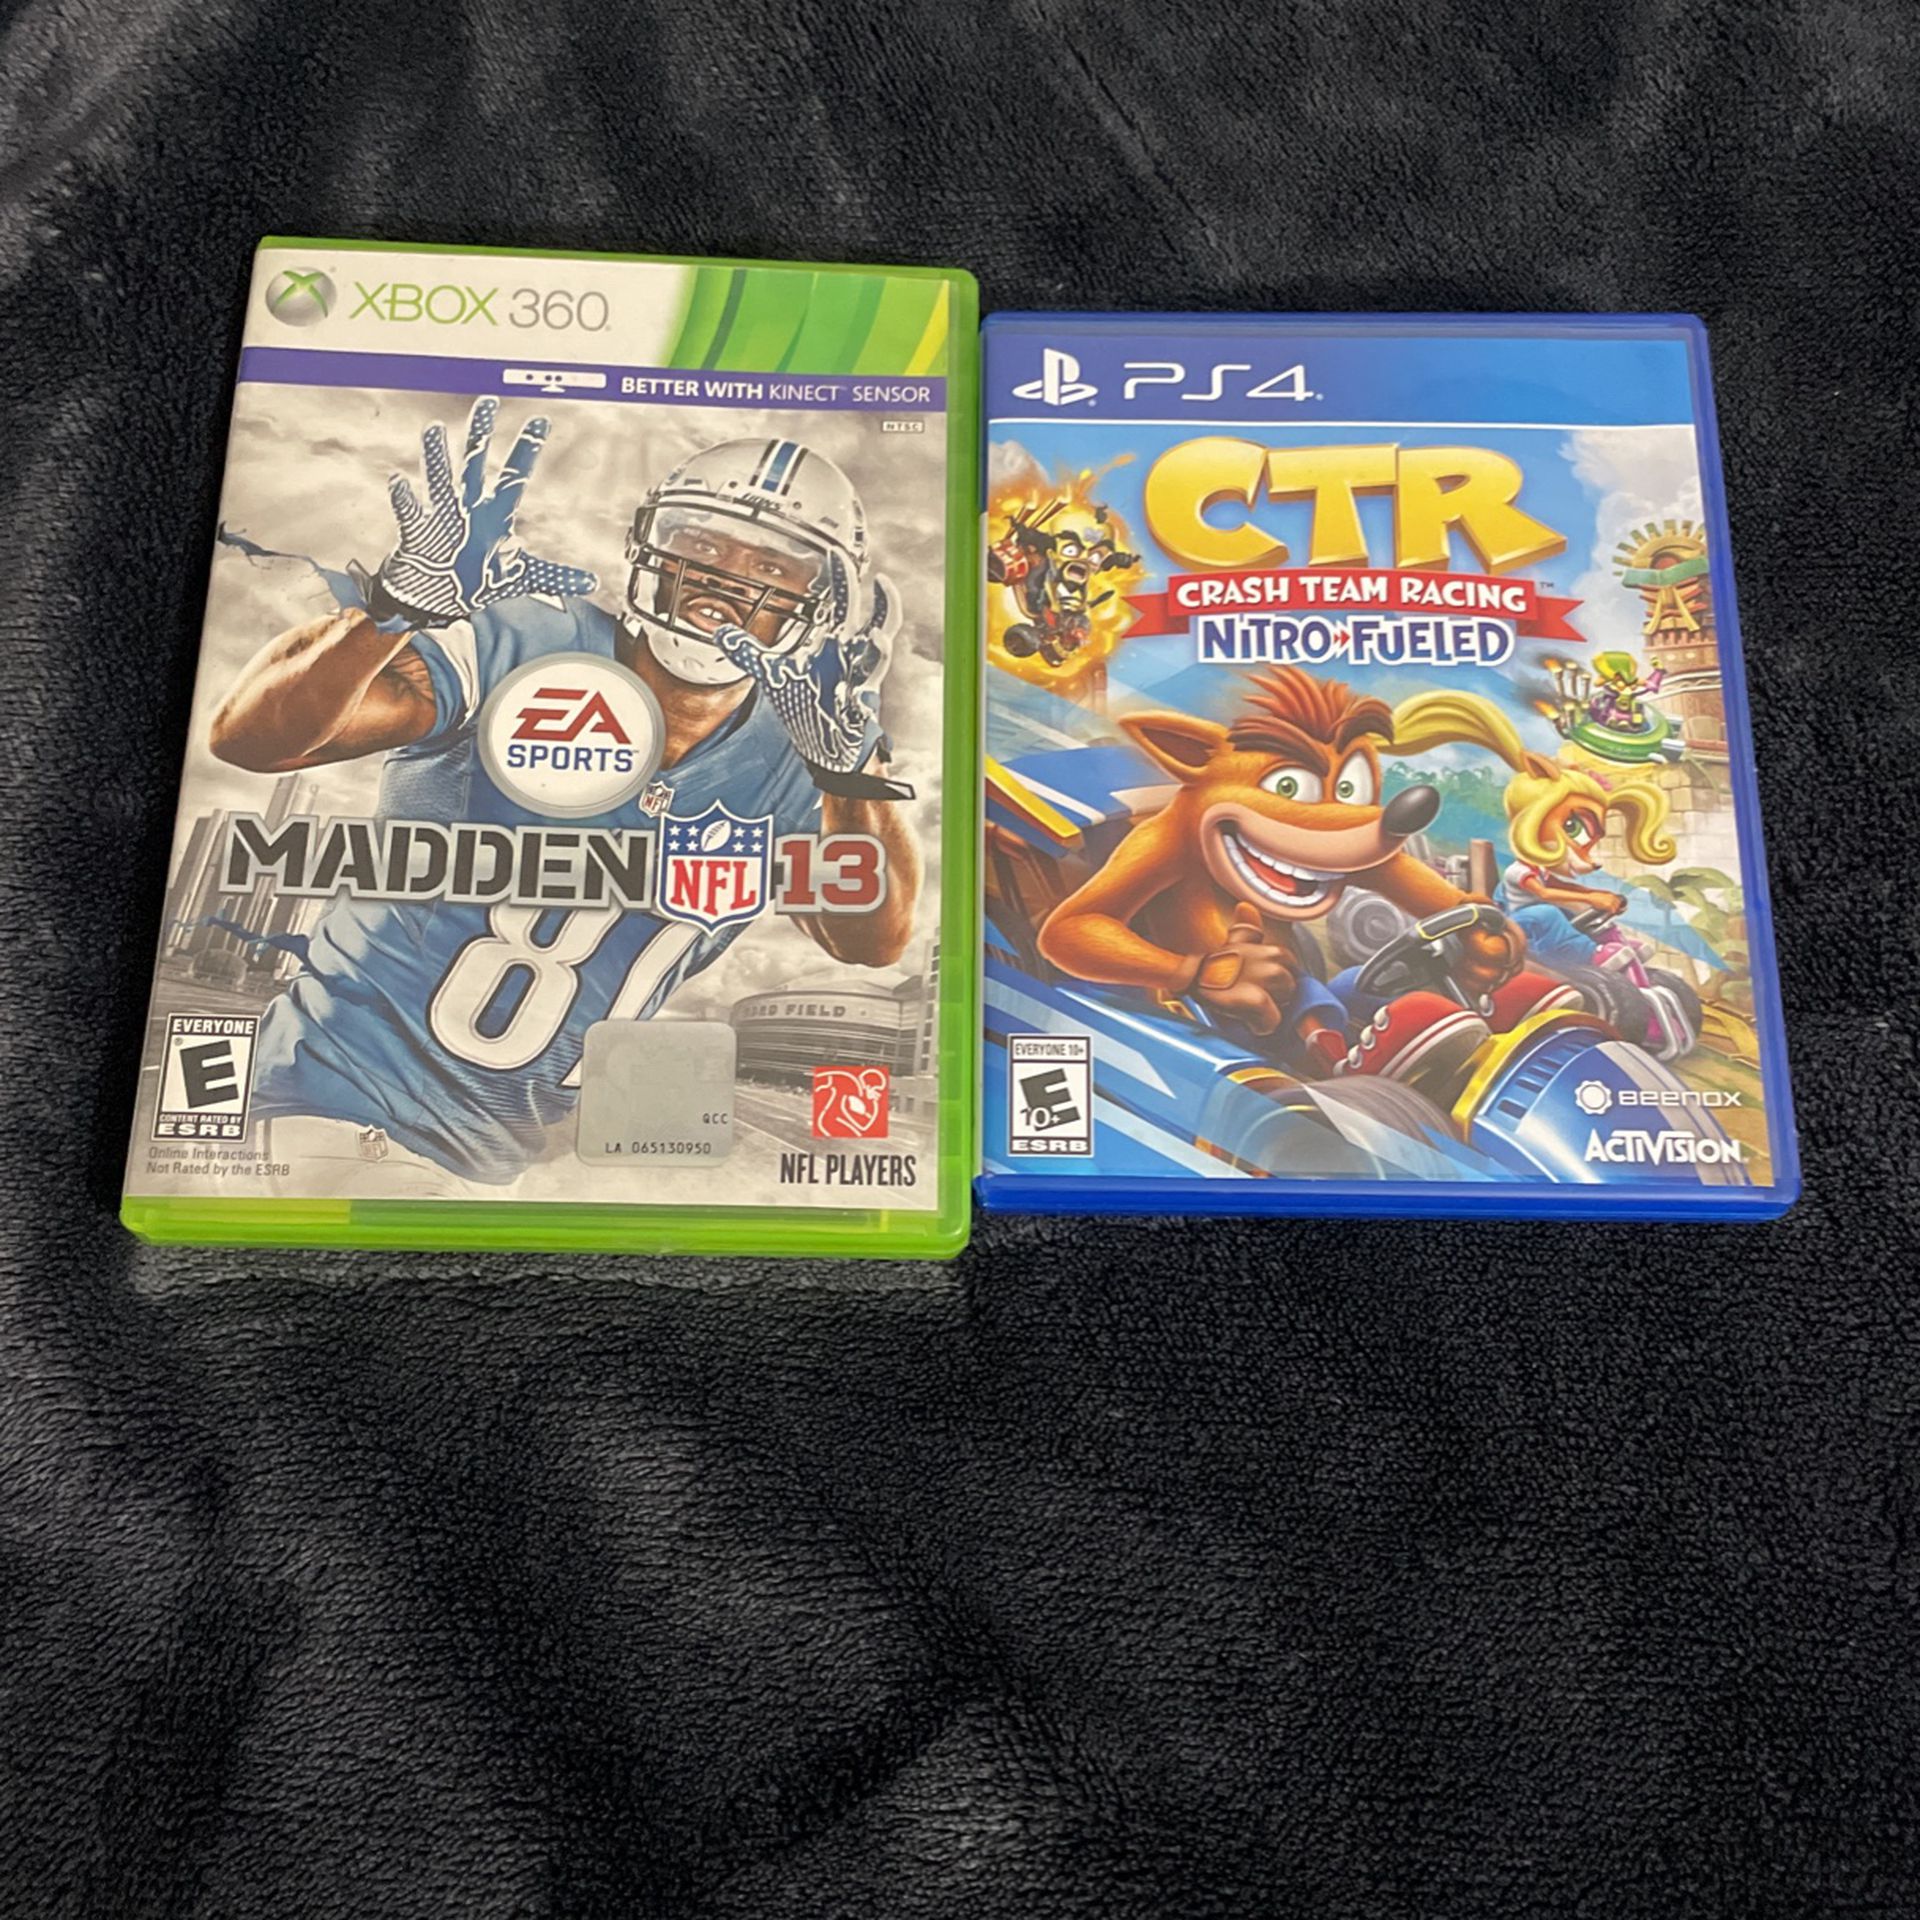 PS4 And Xbox 360 Games